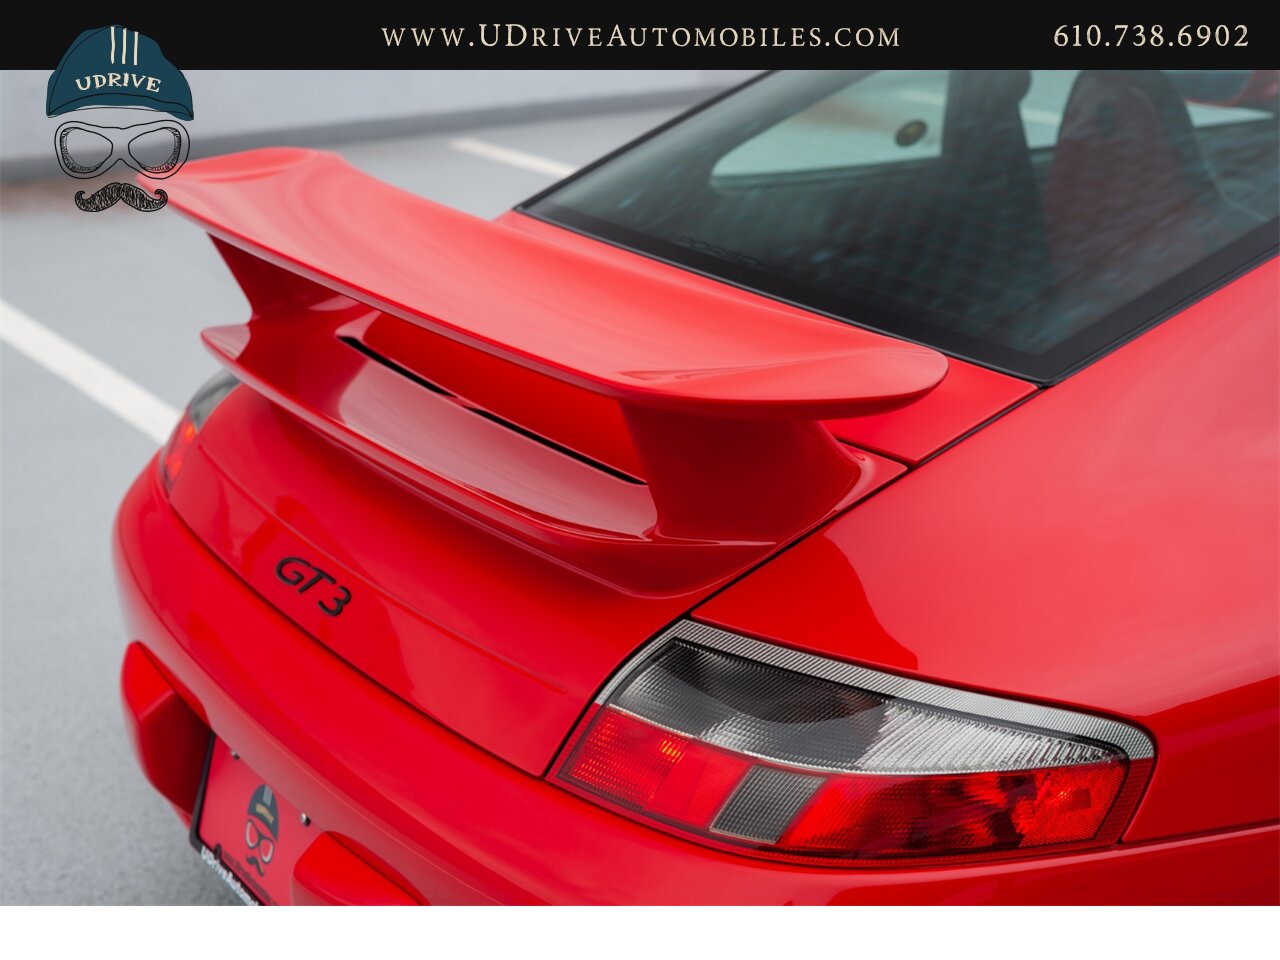 2004 Porsche 911 996 GT3 Guards Red Sport Seats Painted Hardbacks  Painted Center Console 18k Miles - Photo 22 - West Chester, PA 19382